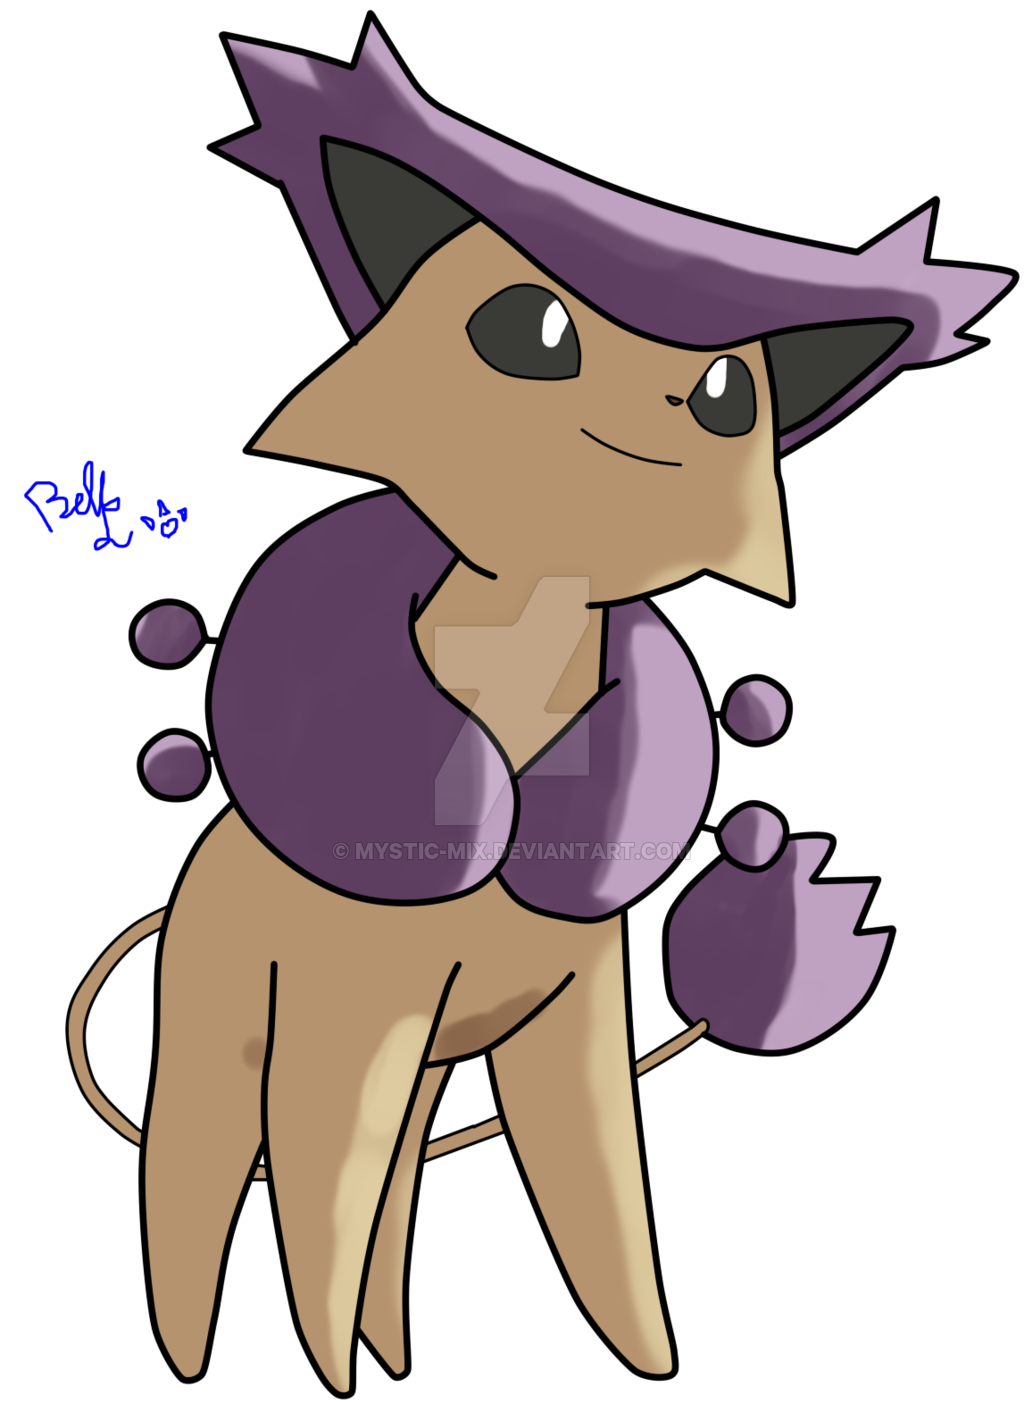 Image Pokemon Delcatty By Mystic Mix D8745b7 Png Your Guide To Pokemon Wikia Fandom